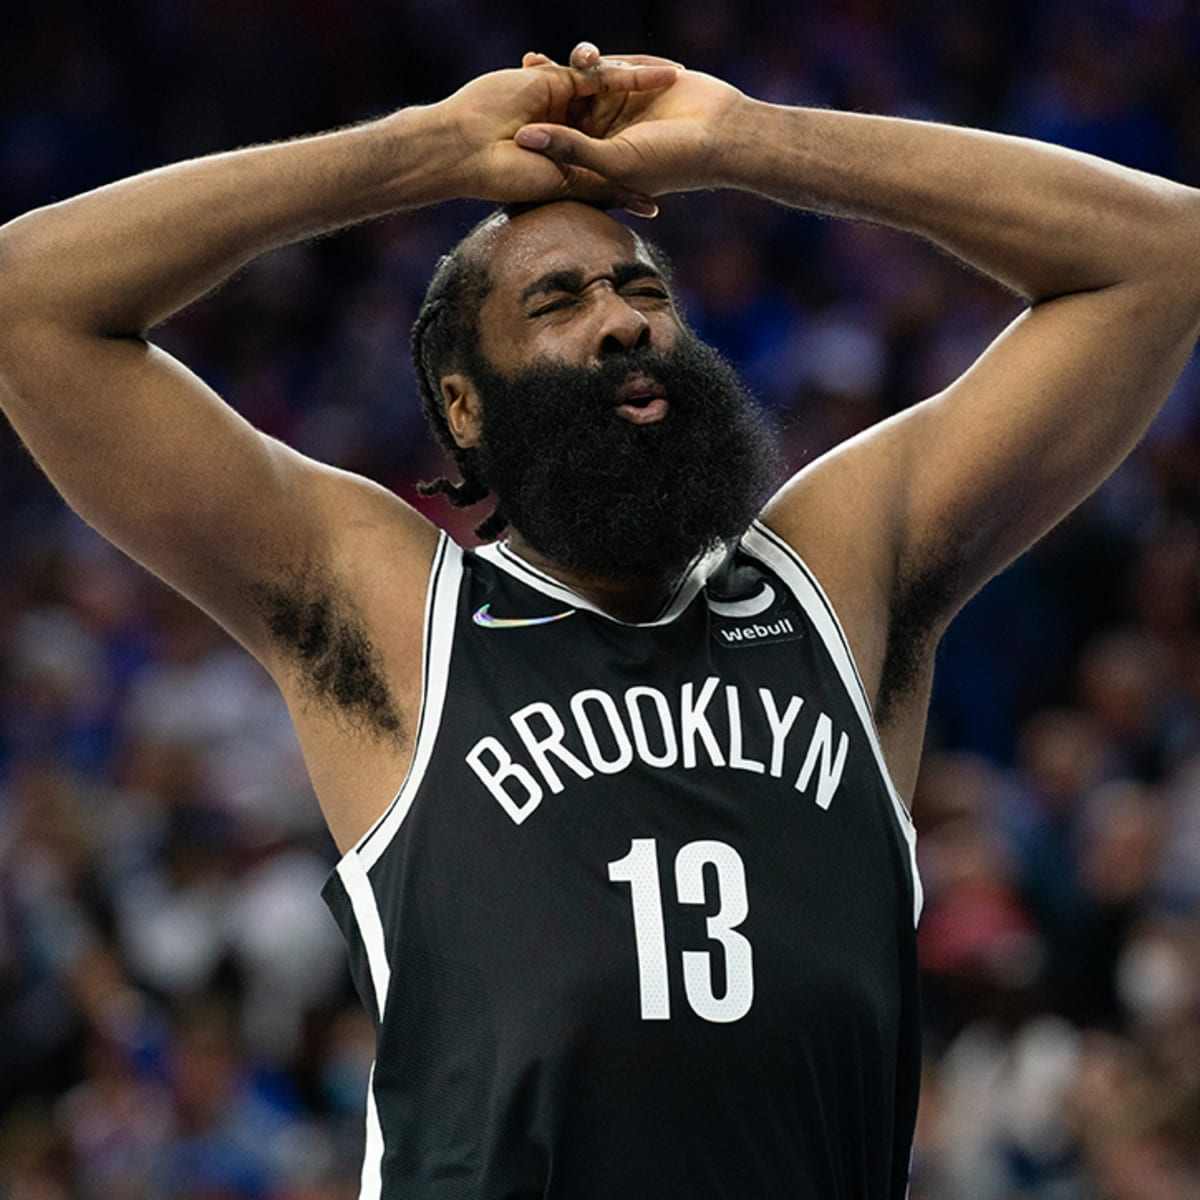 Nets 'City Edition' uniforms pay tribute to New Jersey roots - NetsDaily